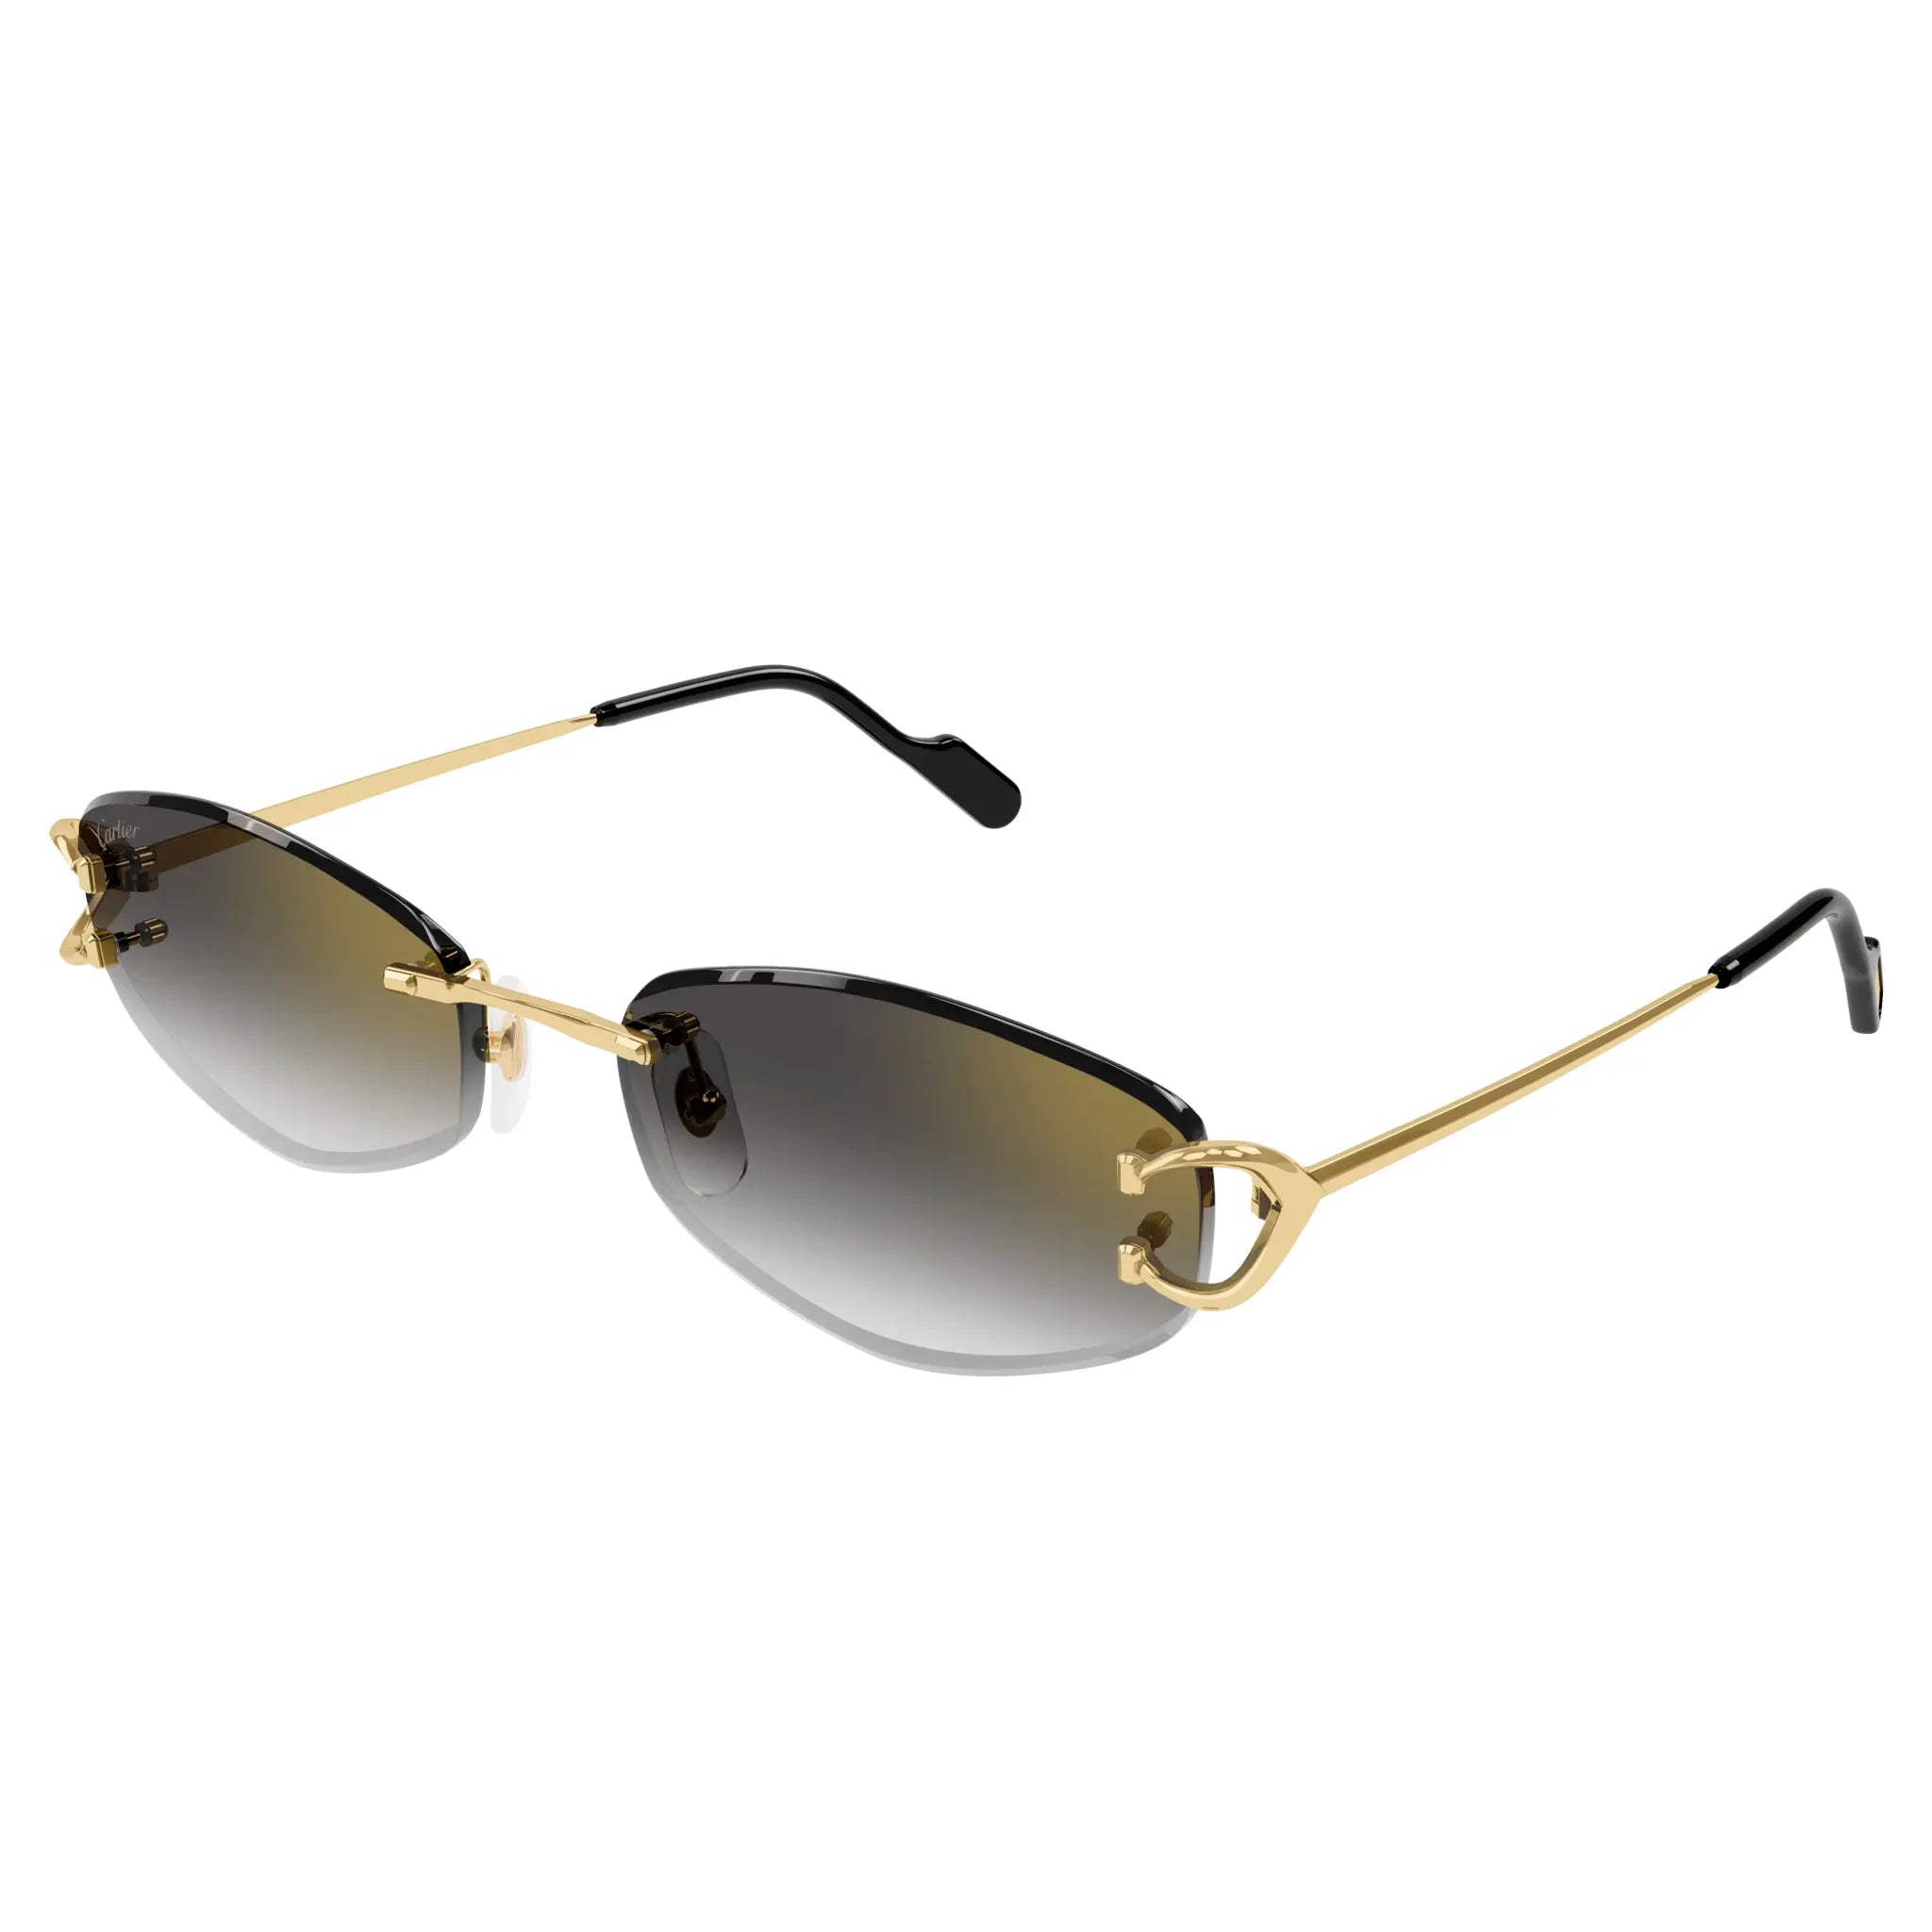 Front Side view of Cartier Eyewear CT0467S-001 Gold Grey Sunglasses